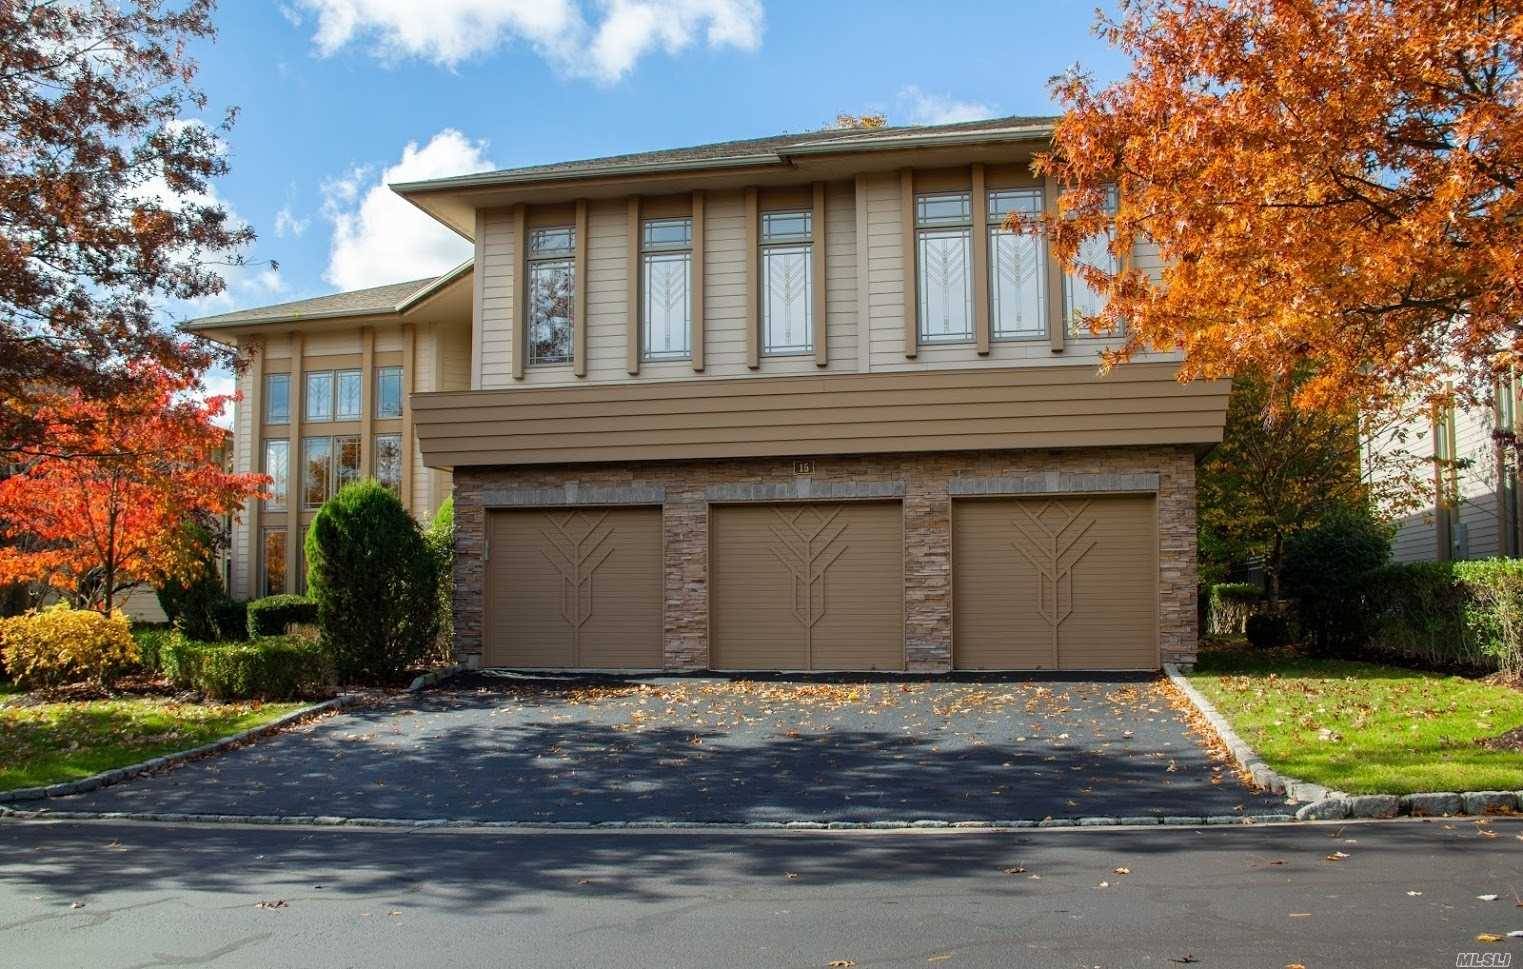 Gorgeous Spacious 5 Bedroom Home With Open Floor Plan In 24 Hr Gated Community Of Hamlet Estates, Country Club Living, Chef's Kitchen, Main Level Bedroom Bath, Large Master Suite Sitting ...